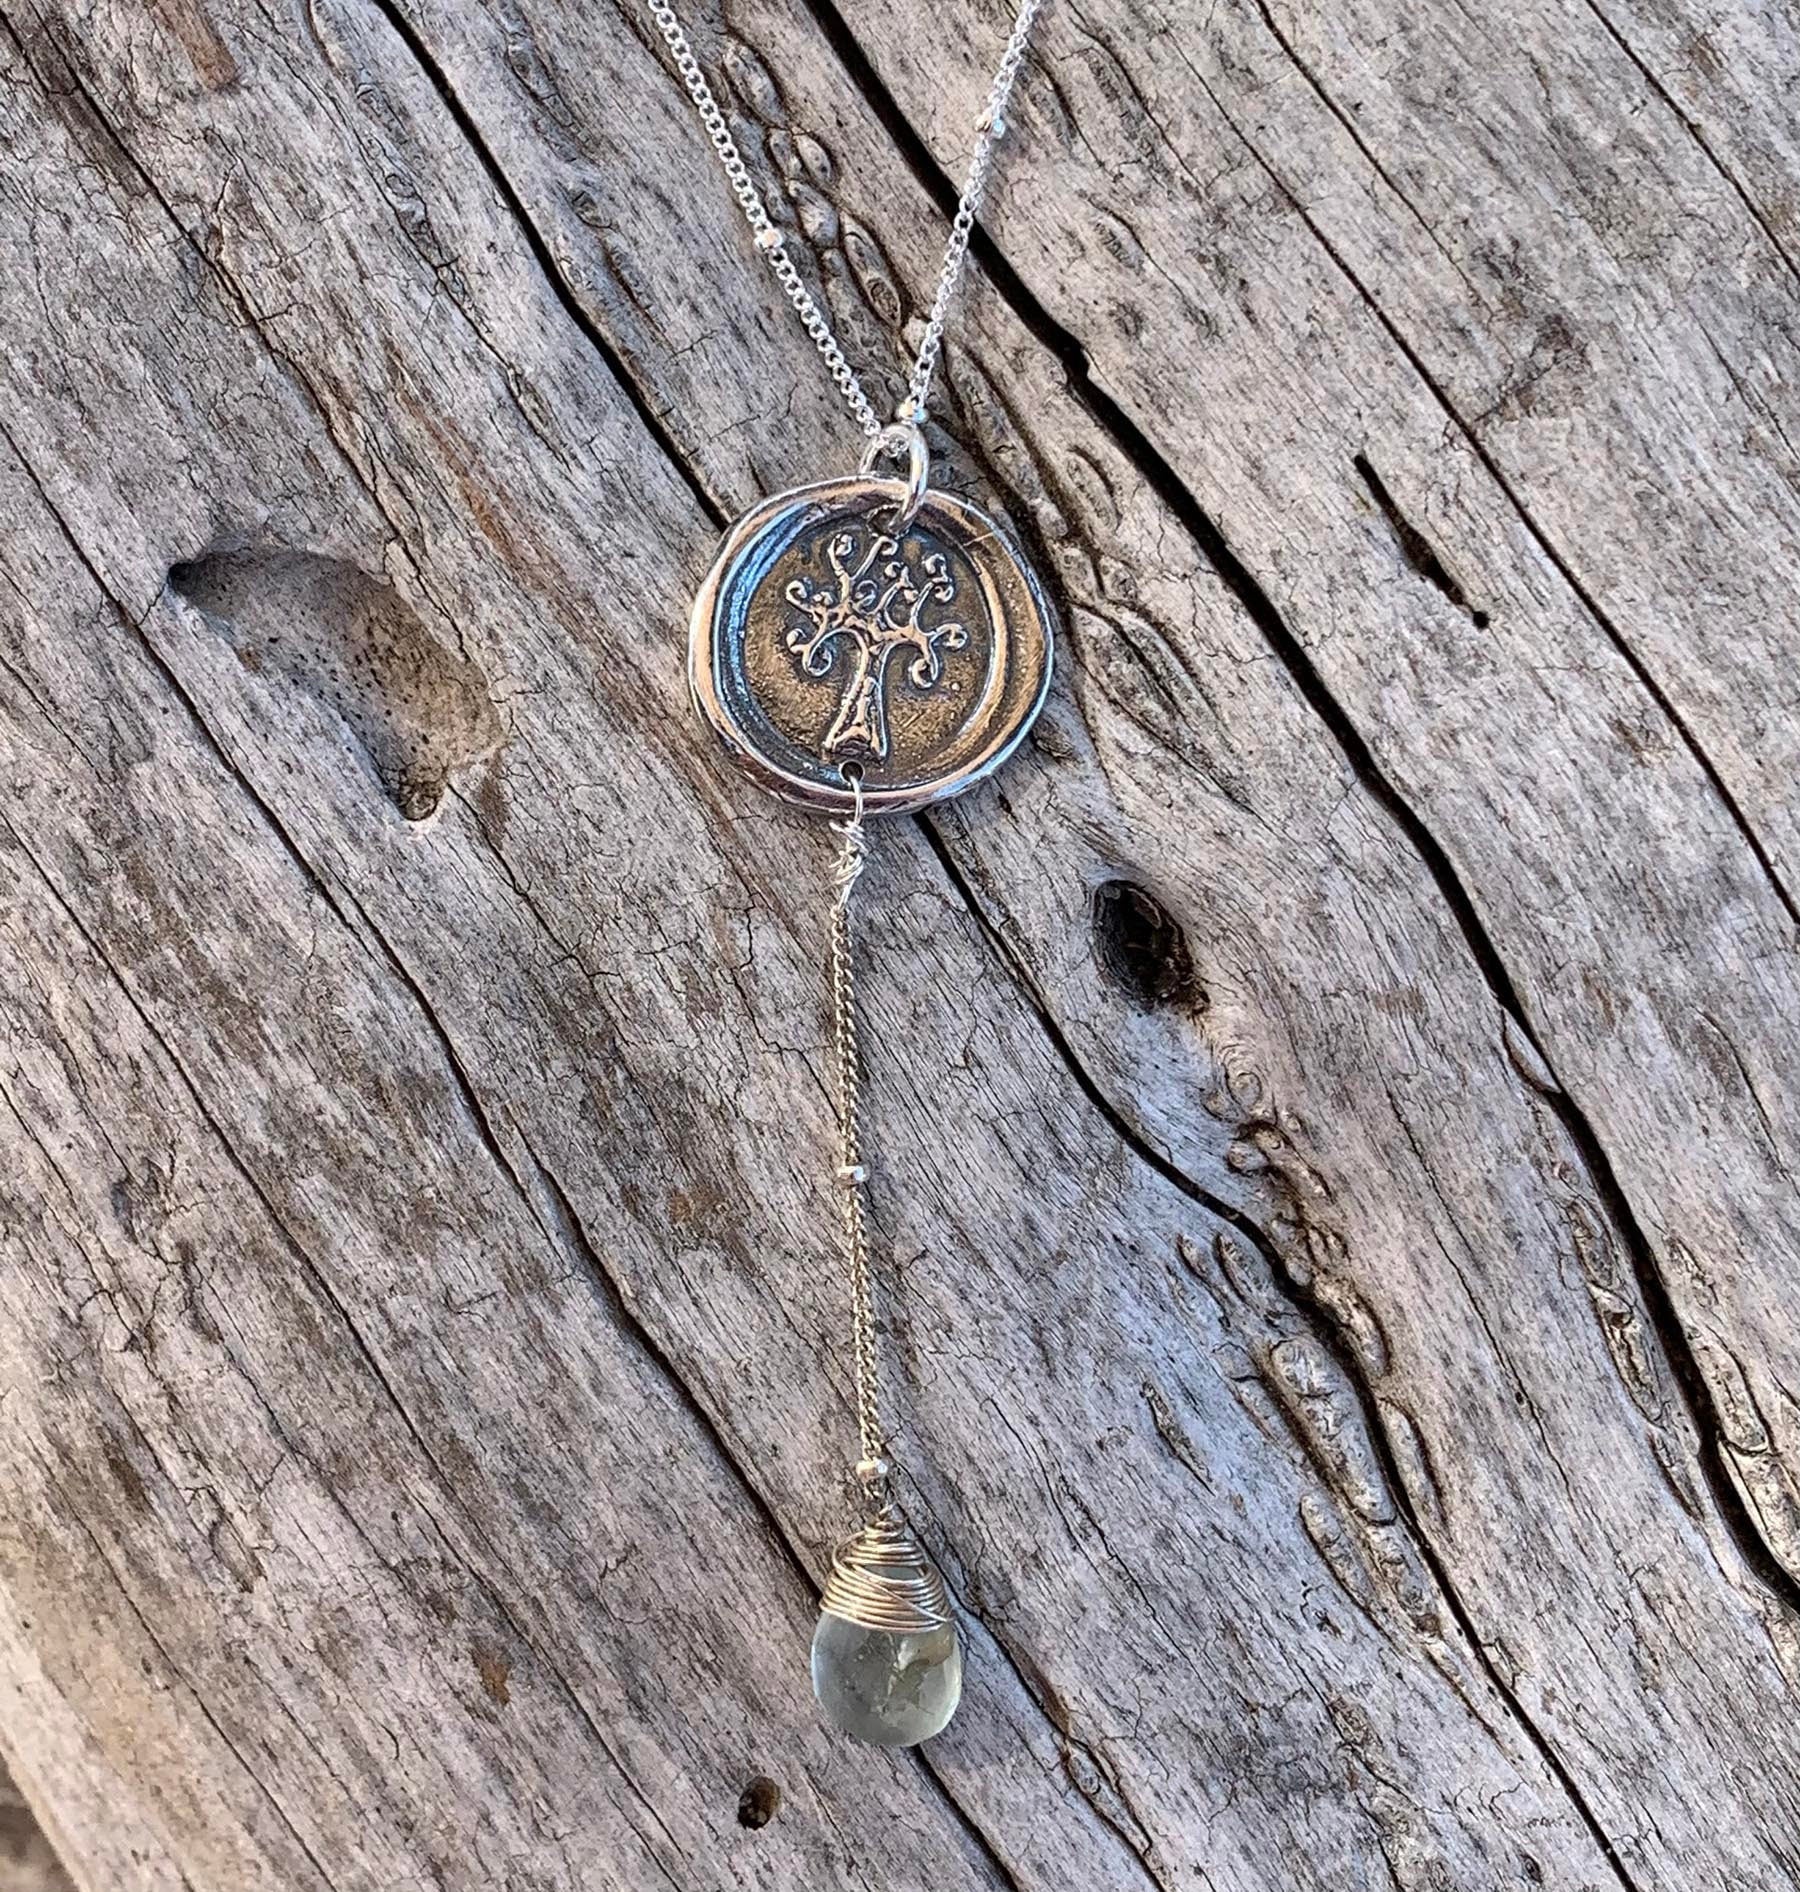 Handmade Sterling Tree of Life Silver Charm Lariat Delicate Necklace with Aquamarine Drop